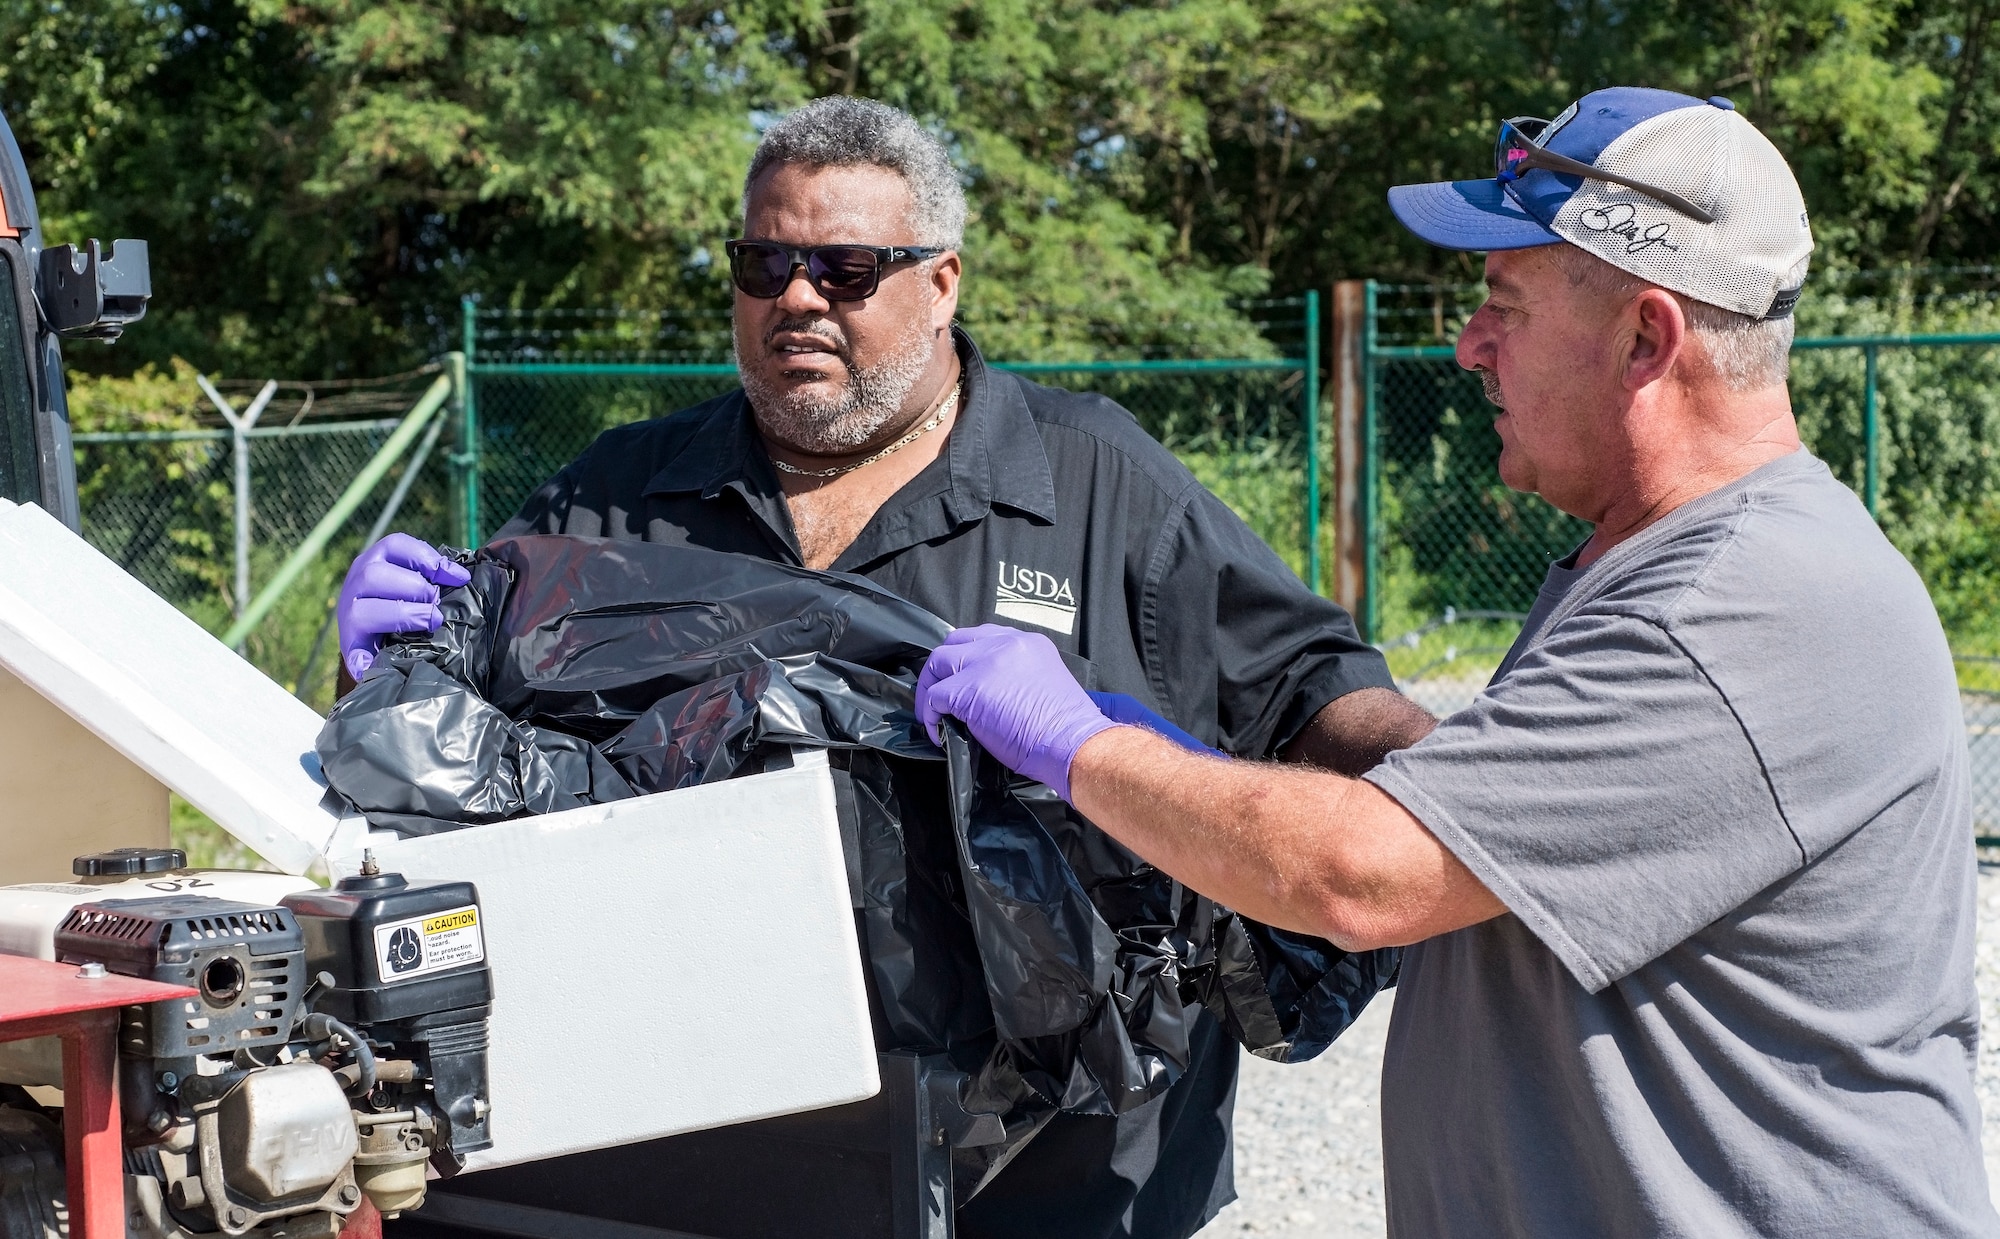 Darryl Moore (left), U.S. Department of Agriculture Animal and Plant Health Inspection Service Plant Protection and Quarantine representative and state plant health director, and Kenneth Barnes, 436th Civil Engineer Squadron pest management section supervisor, unpack approximately 500 frozen dead Japanese beetles Aug. 9, 2018, at Dover Air Force Base, Del. The base was selected by the USDA as a test site for Japanese beetle population reduction by introducing a single cell, fungal-like pathogen to reduce the fecundity or reproductive capability of the beetle. (U.S. Air Force photo by Roland Balik)